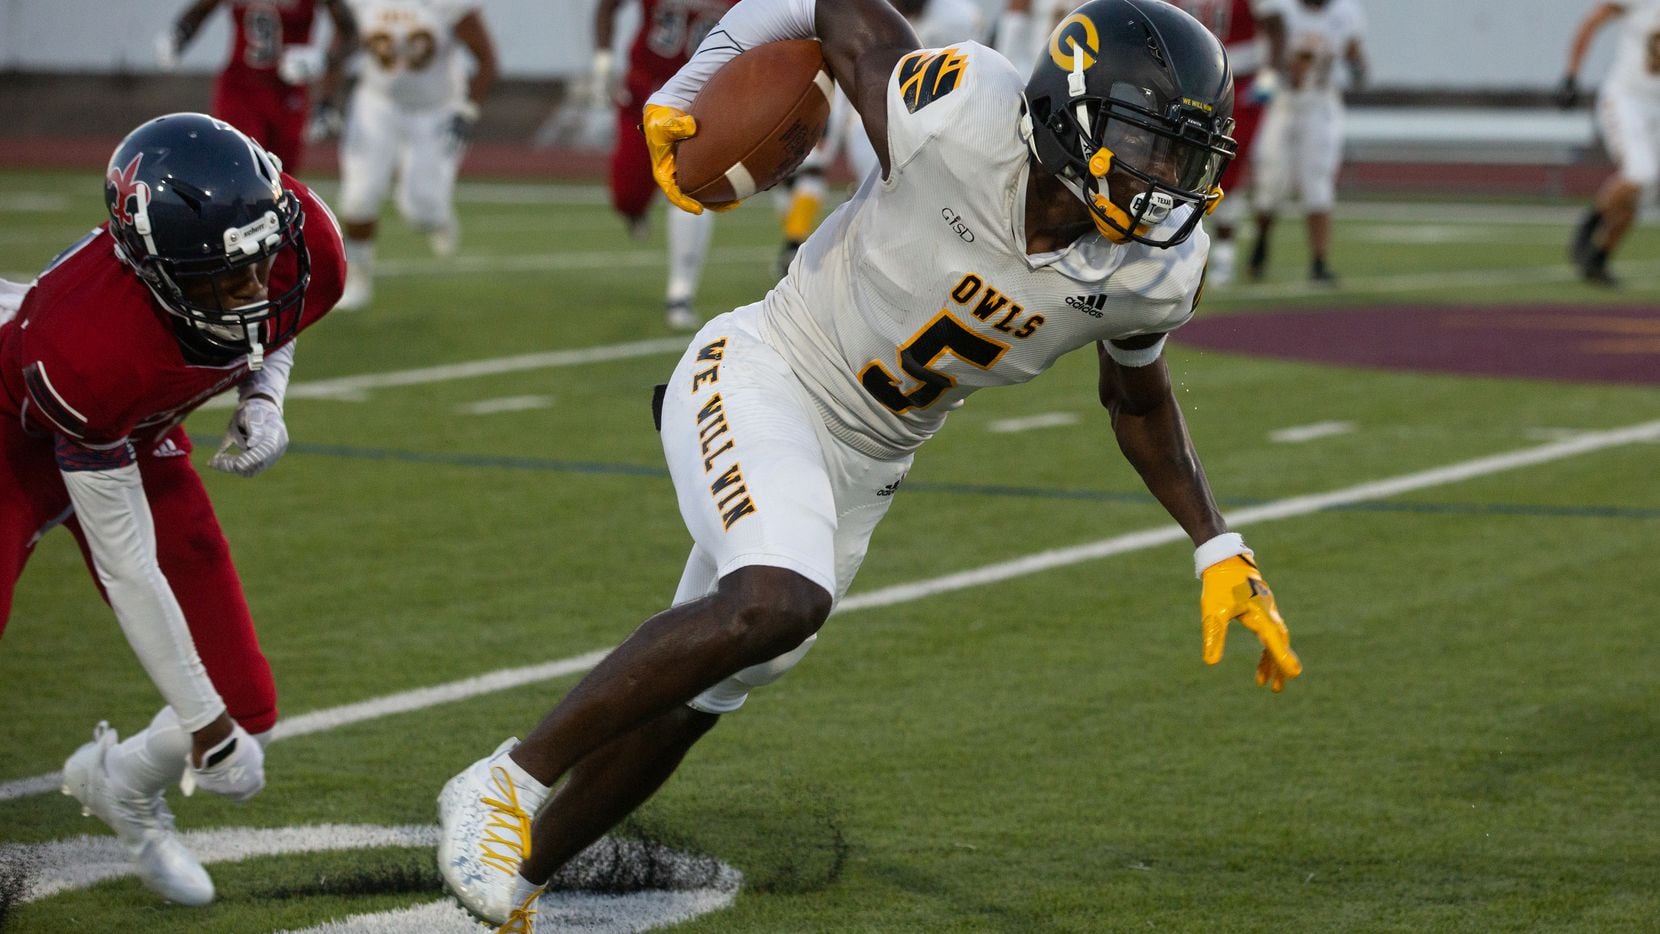 Garland High School wide receiver Jordan Hudson (5) powers through the defense during their season-opening game against Justin F. Kimball High School at Sprague Stadium in Dallas, TX on August 27, 2021.   (Shelby Tauber/Special Contributor)